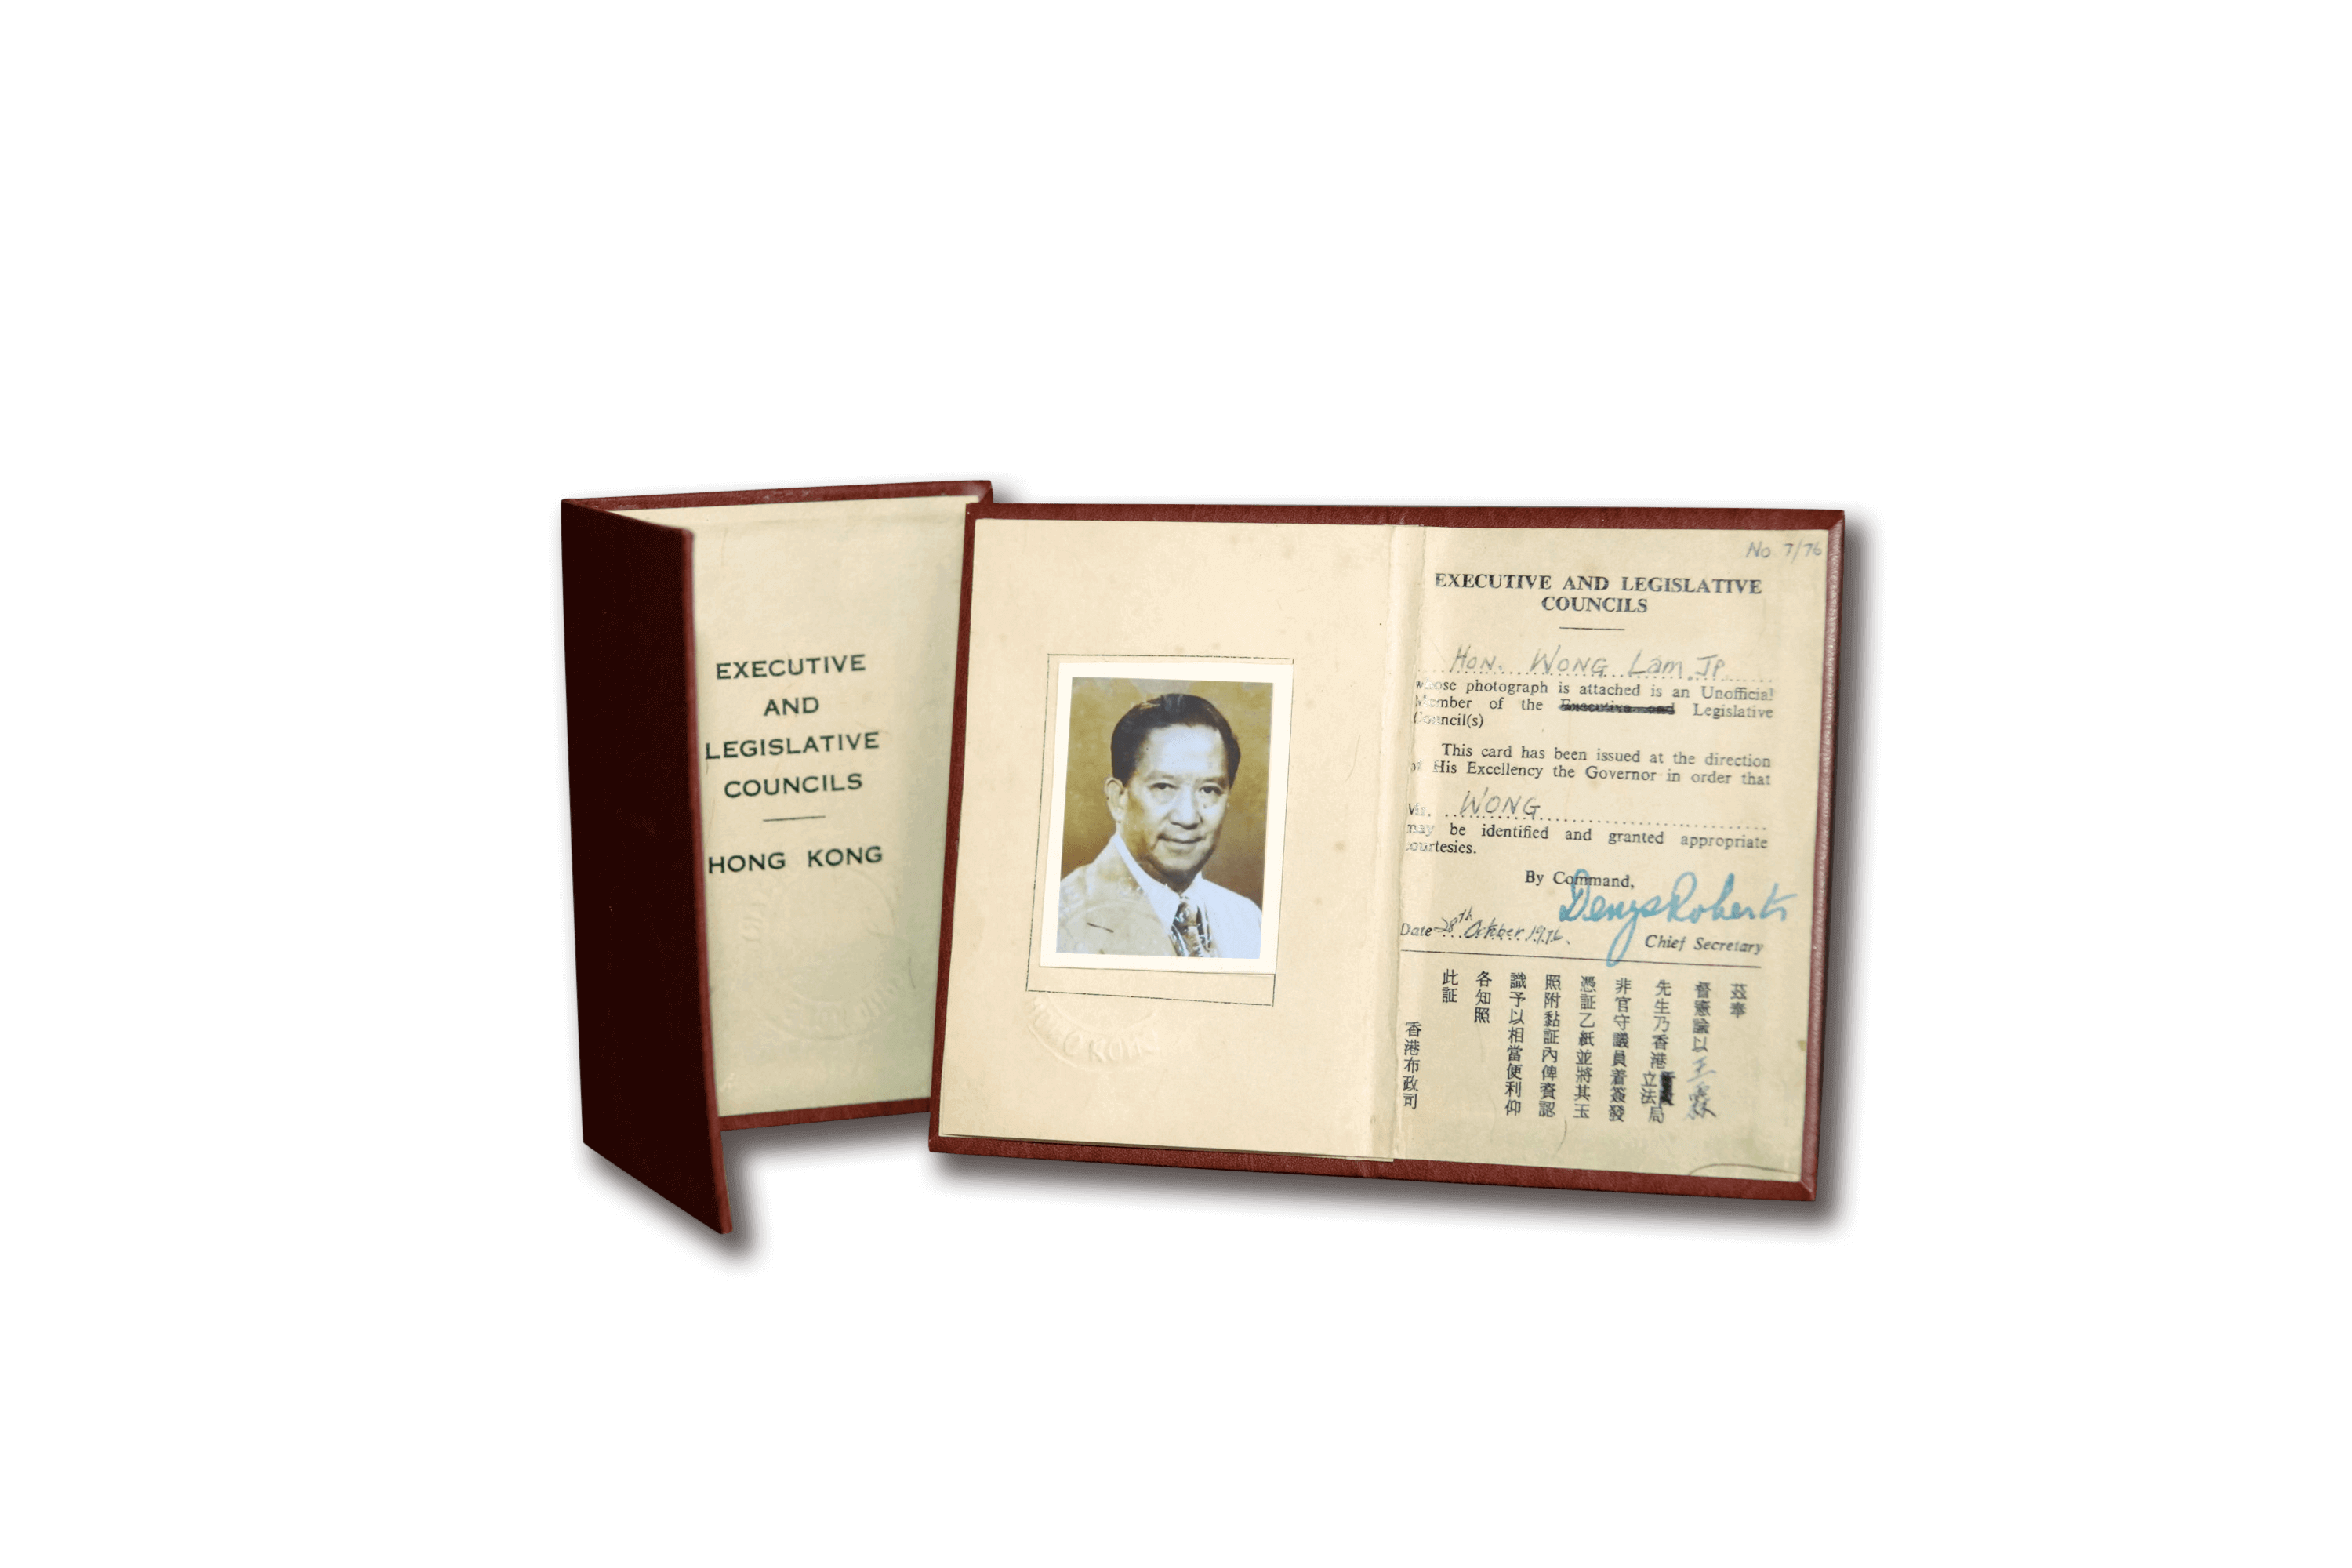 The Member’s identification pass issued to WONG Lam (1919-2016) (Replica)